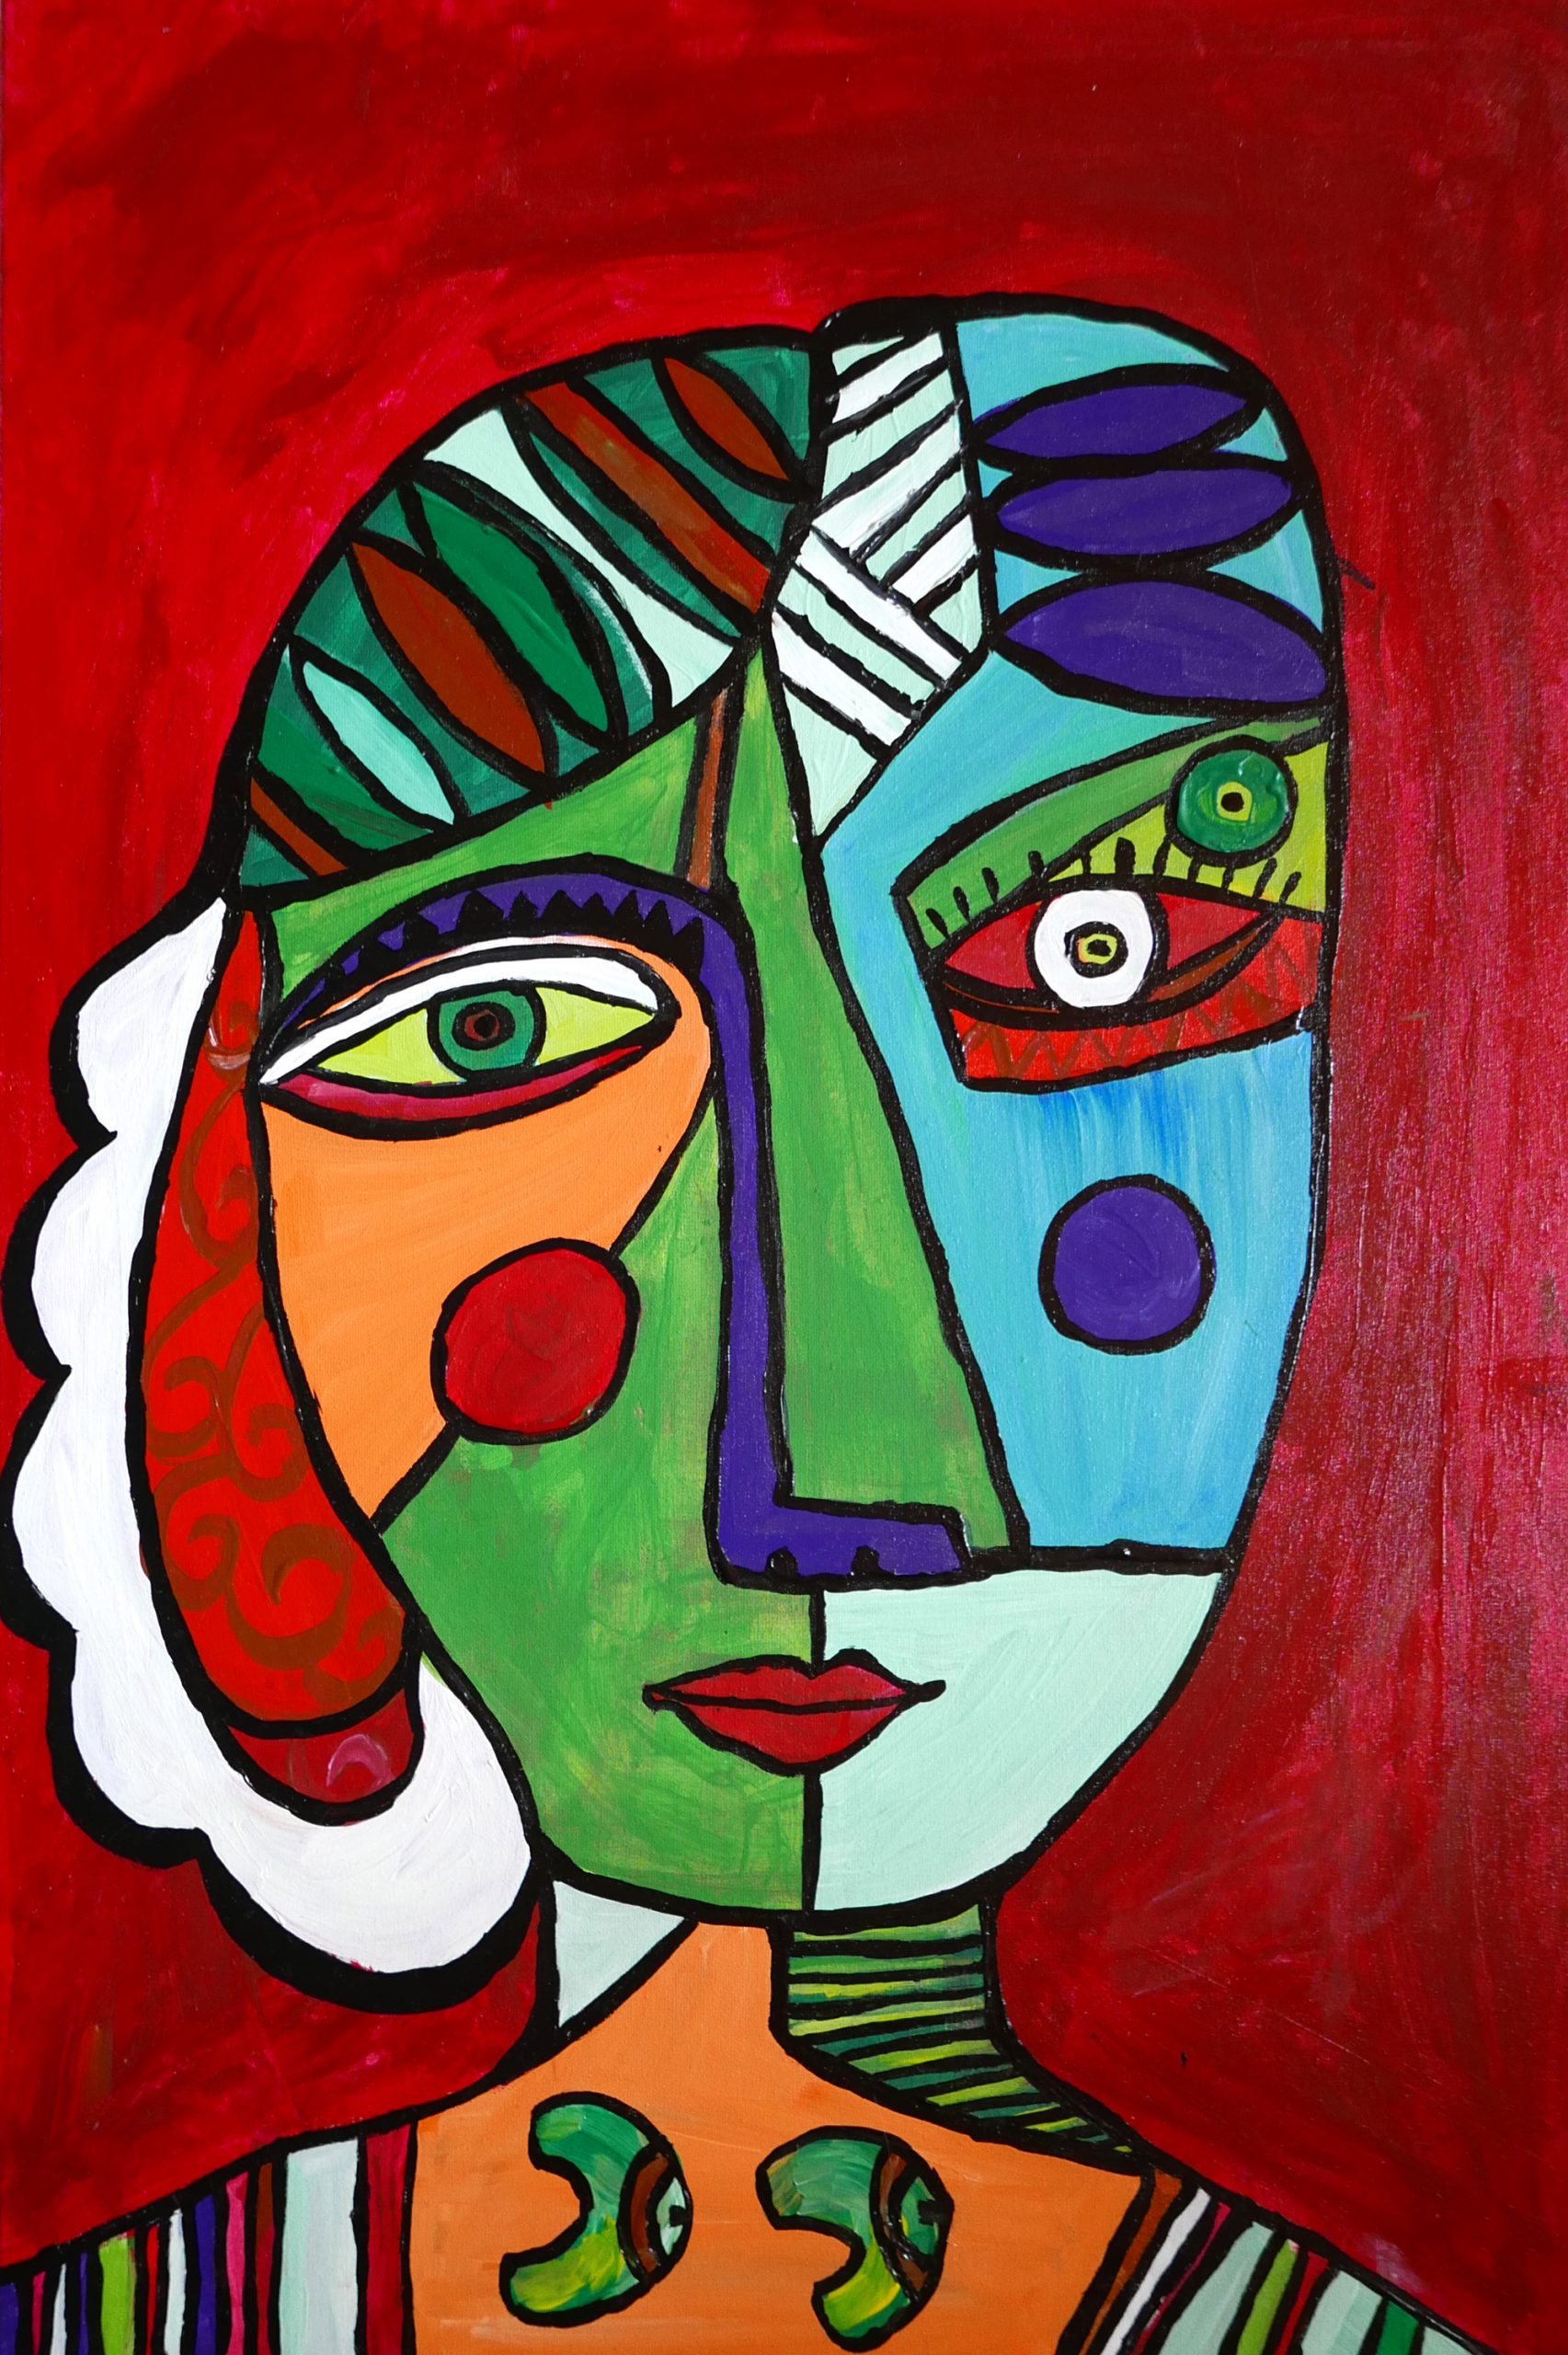 Inspired by picasso Anna Becker